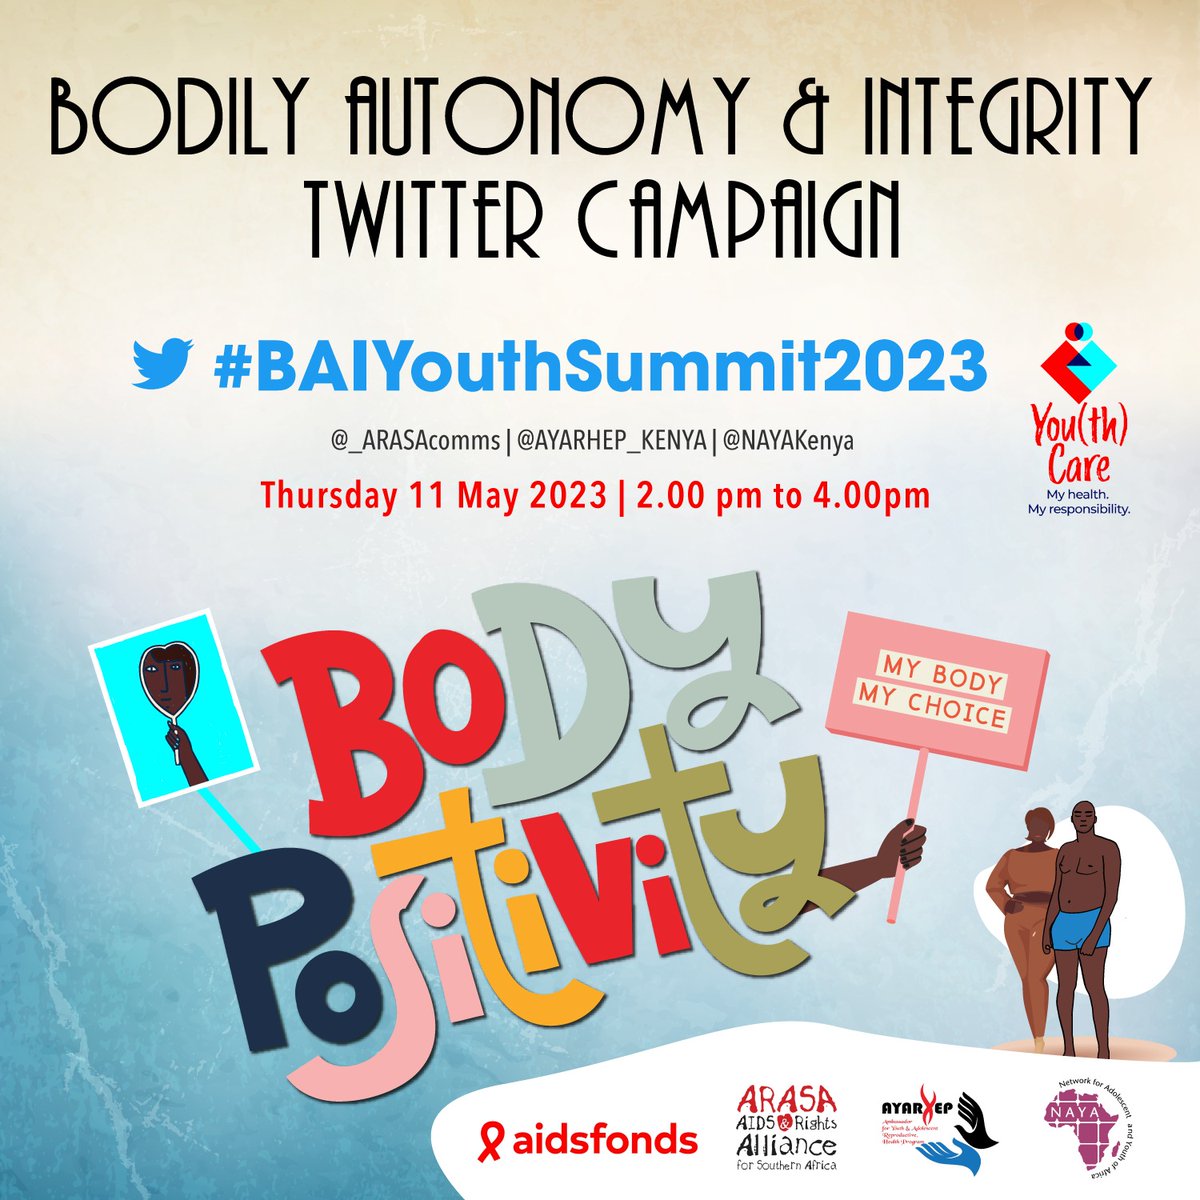 Inviting us to introspect and share on a key concern in our communities today! The #BAIYouthSummit2023 seeks to explore and advocate for young's rights to bodily autonomy and integrity!
@NAYAKenya @Aidsfonds_intl @AYARHEP_KENYA @_ARASAcomms @KELINKenya